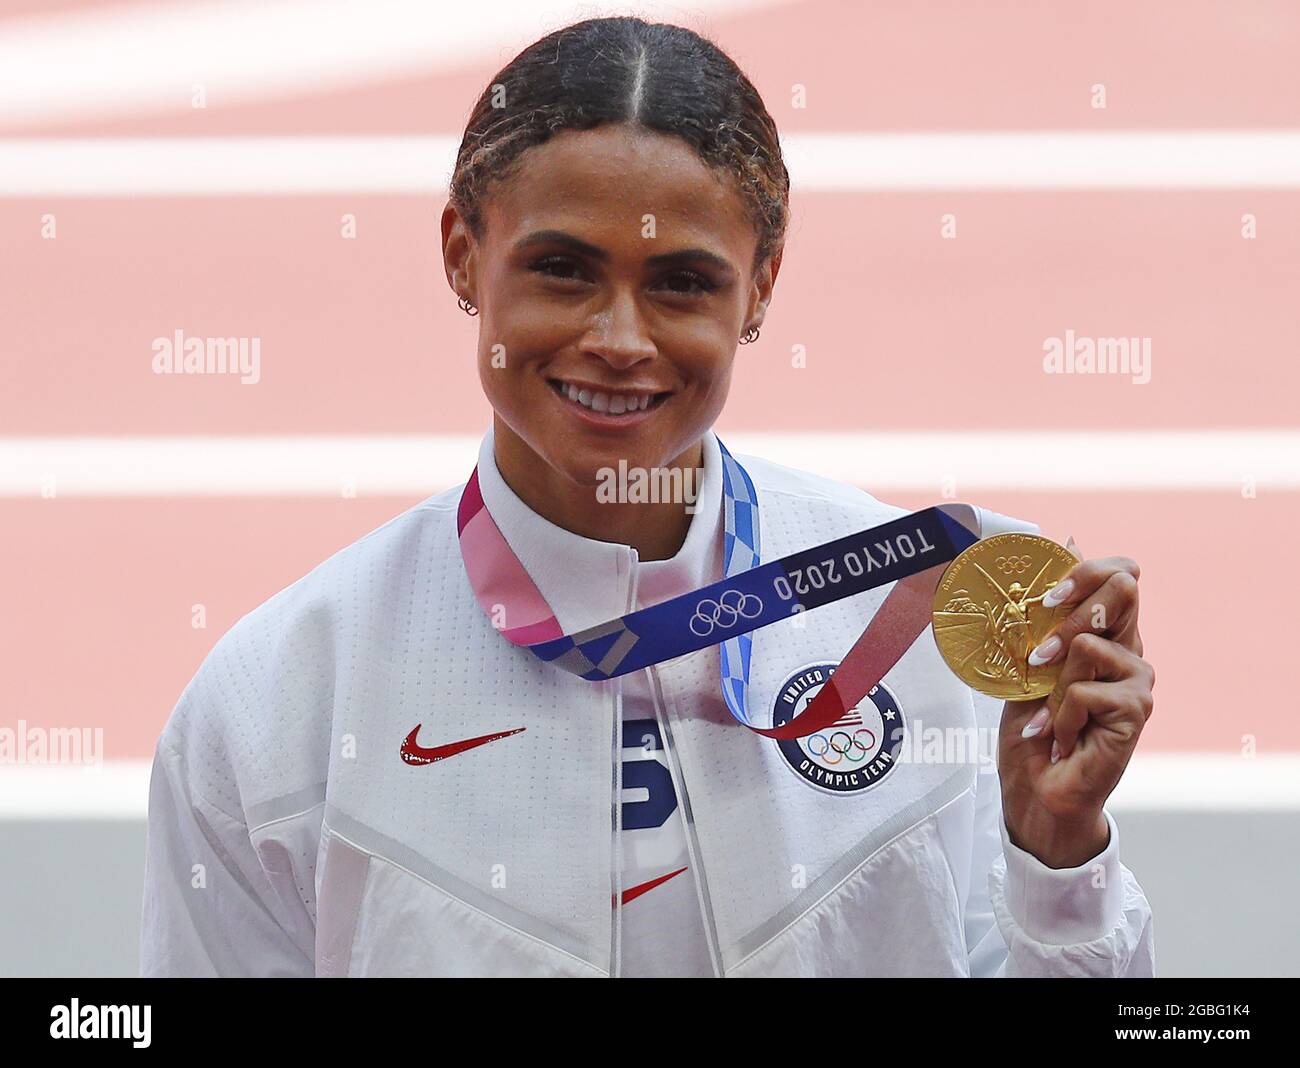 Tokyo, Japan. 04th Aug, 2021. Gold medalist Sydney McLaughlin of the USA poses on the podium after winning the Women's 400m Hurdles Finals with a new world record time of 51.46 at the Athletics competition during the Tokyo Summer Olympics in Tokyo, Japan, on Wednesday, August 4, 2021. Photo by Bob Strong/UPI Credit: UPI/Alamy Live News Stock Photo